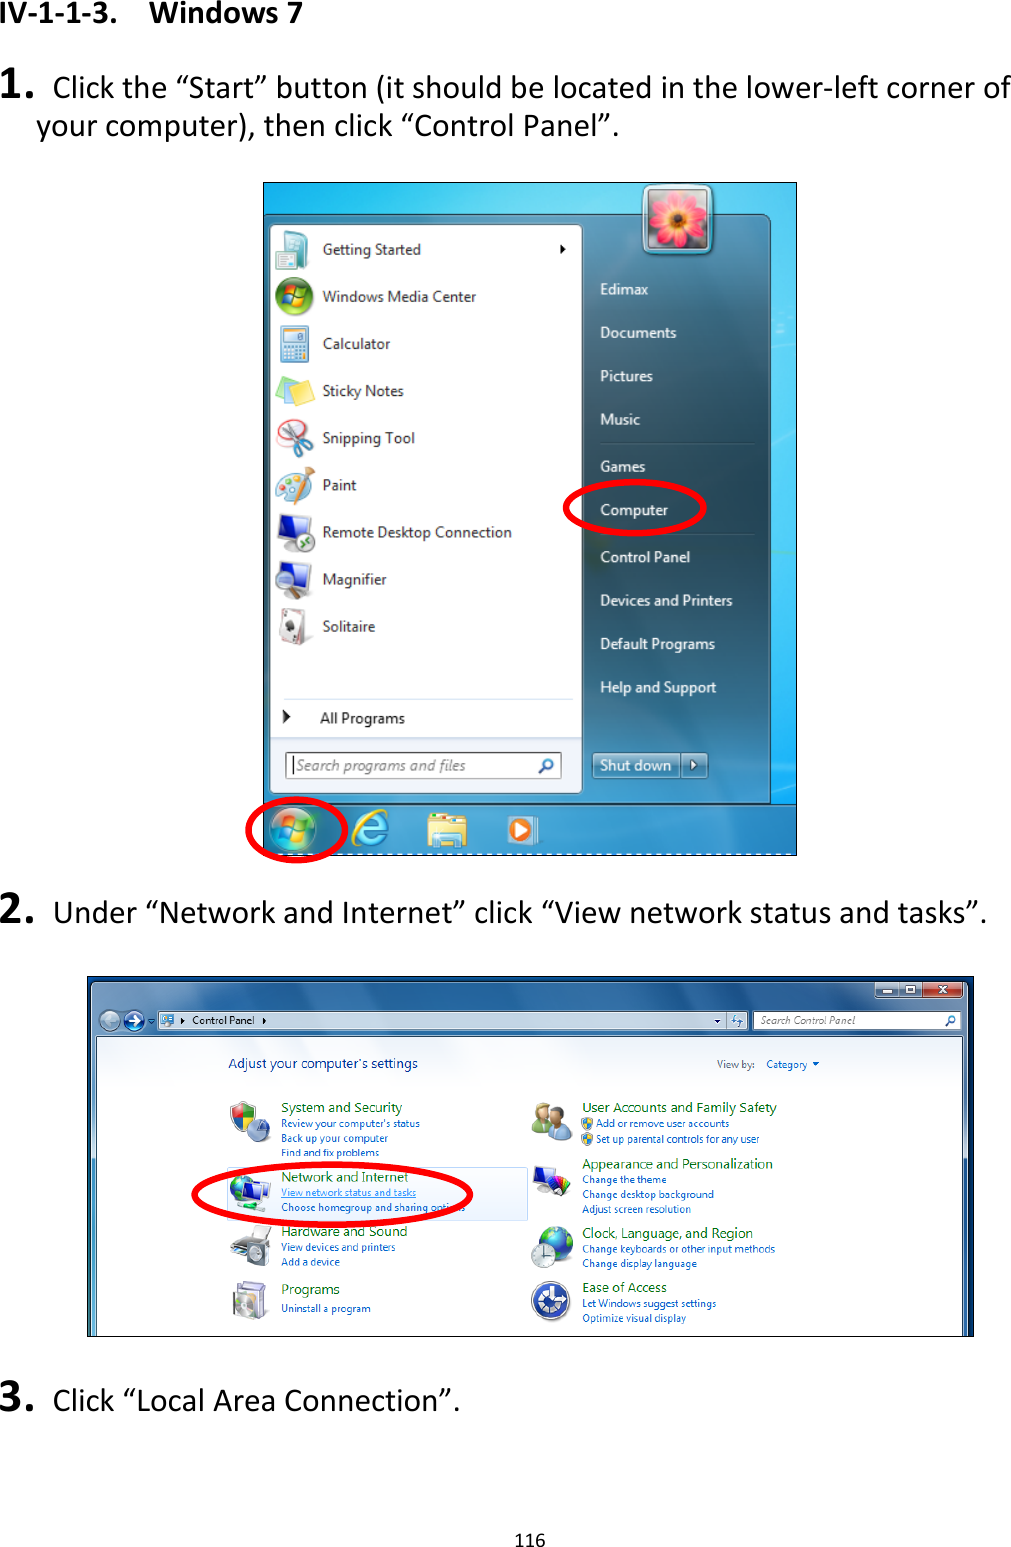 116  IV-1-1-3.  Windows 7  1.   Click the “Start” button (it should be located in the lower-left corner of your computer), then click “Control Panel”.    2.   Under “Network and Internet” click “View network status and tasks”.    3.   Click “Local Area Connection”.  